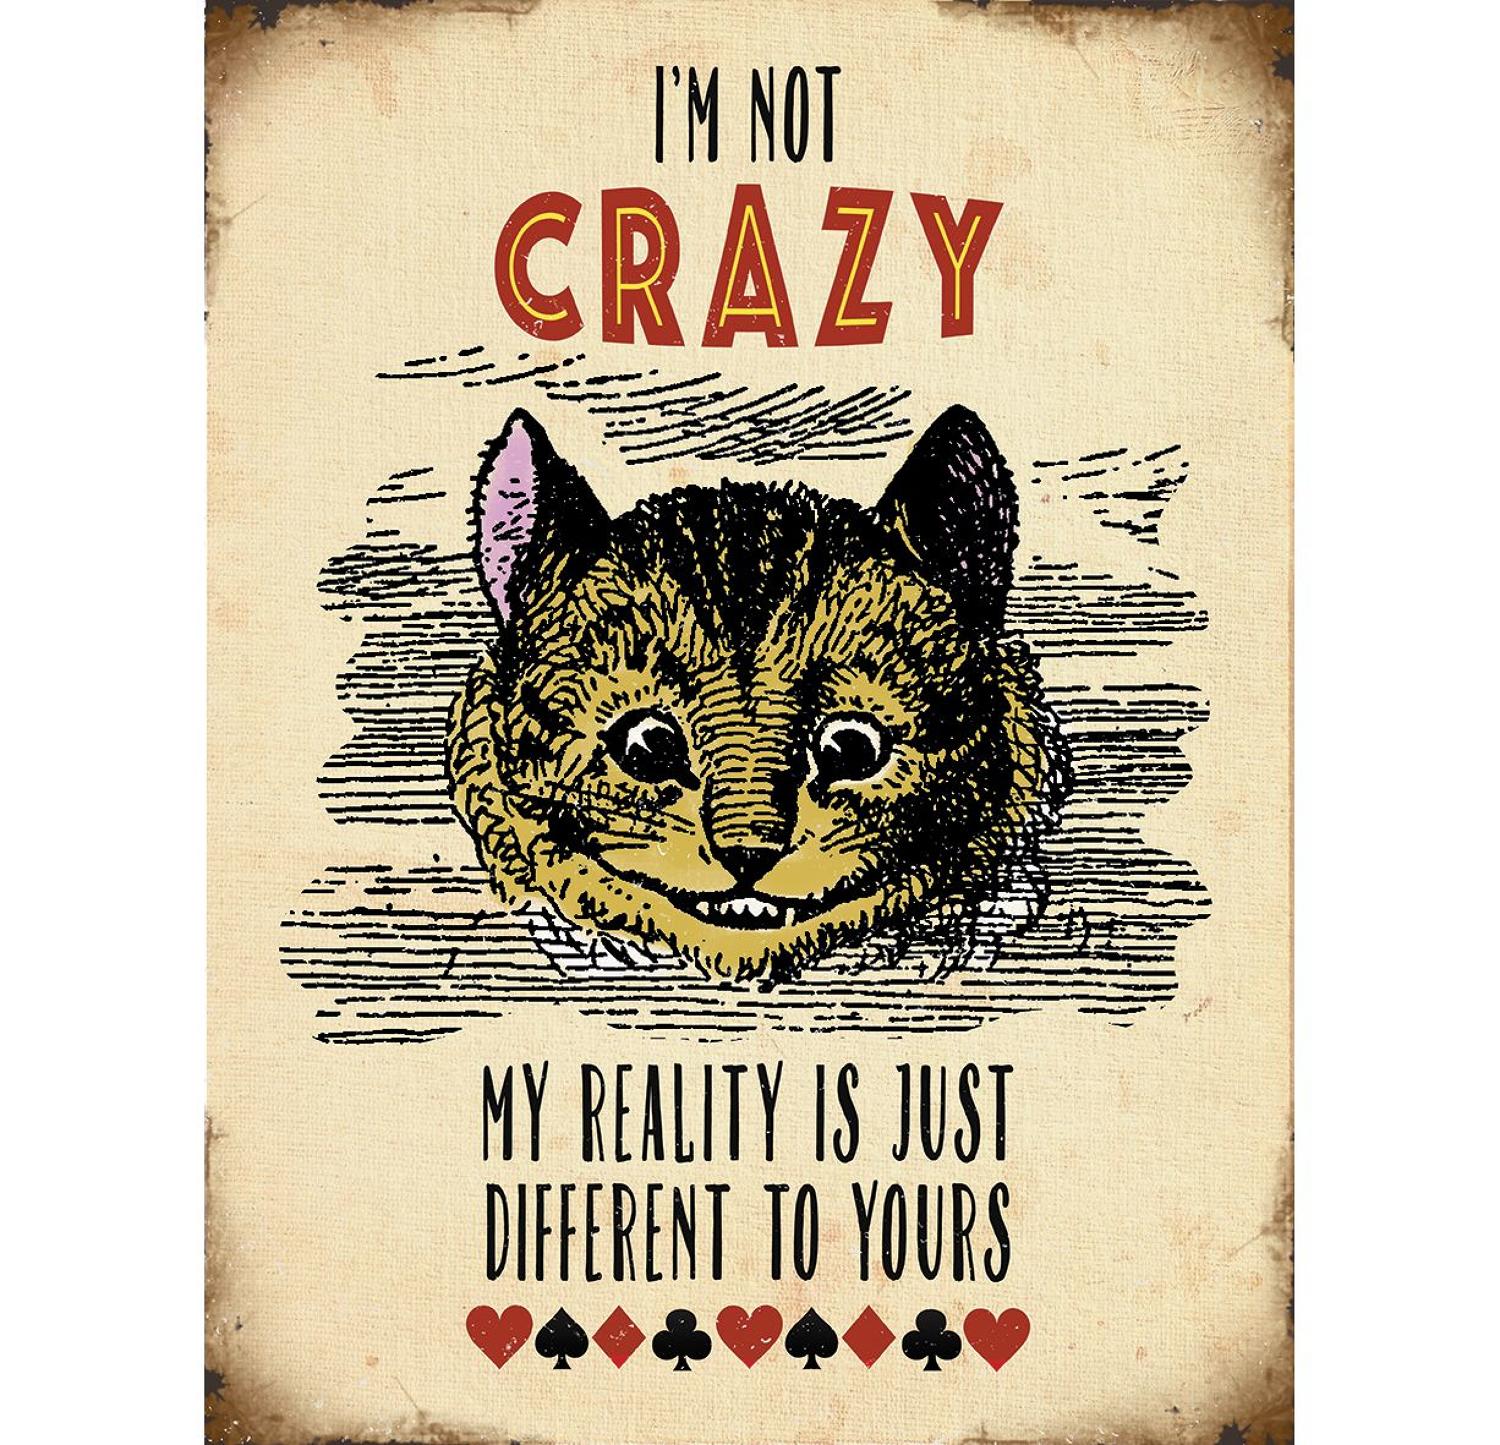 Alice in Wonderland, I'm Not Crazy, metal wall sign